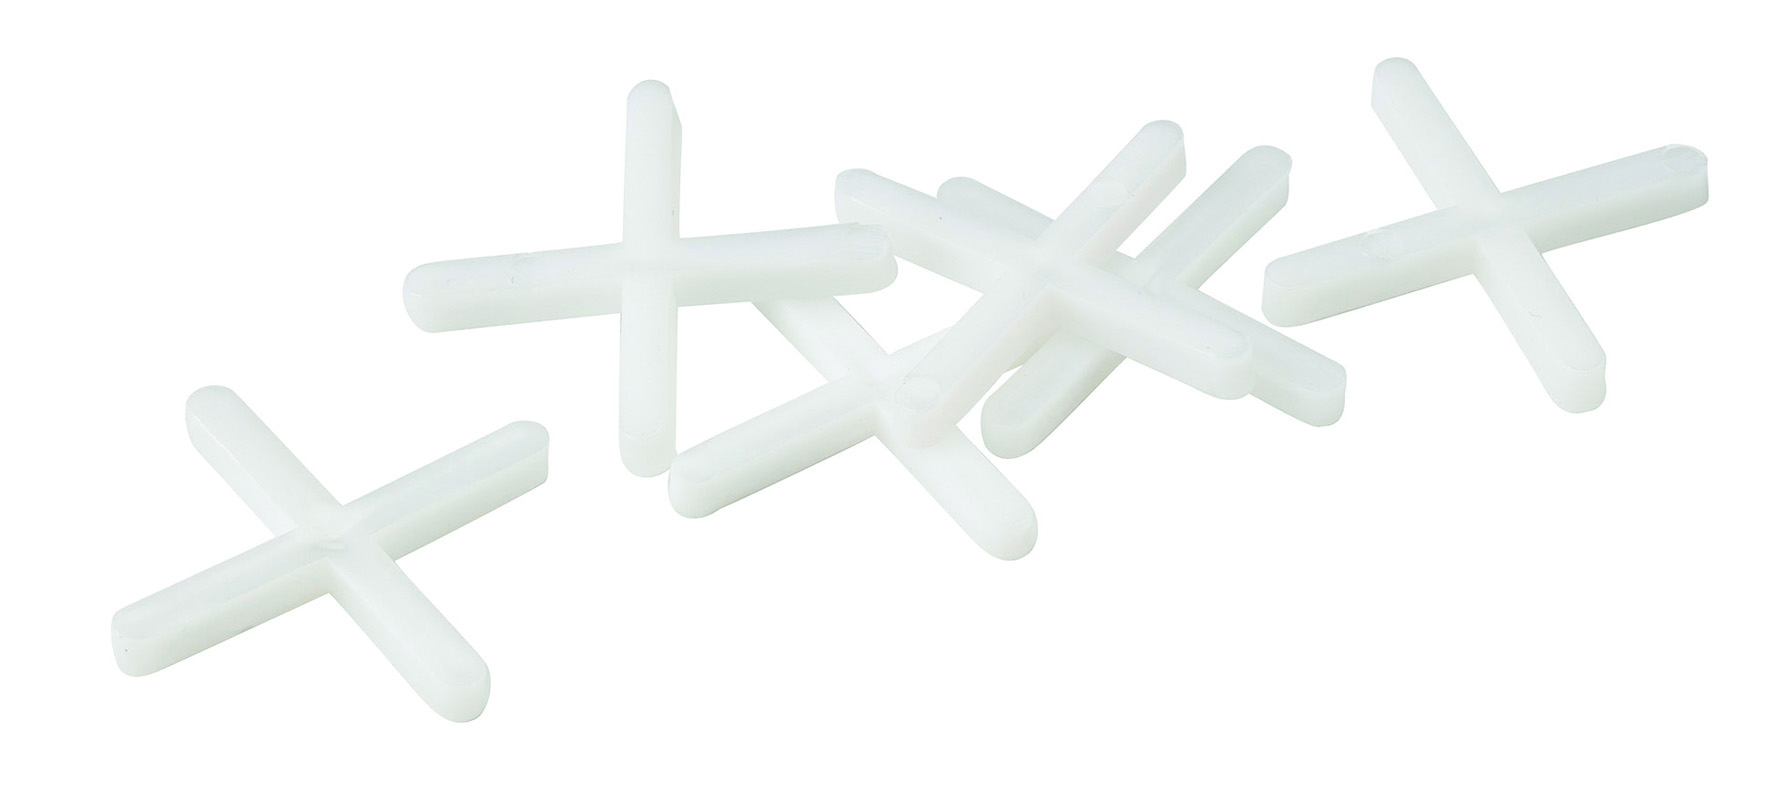 OX Trade Cross Shaped Tile Spacers - 3mm (250 pcs)